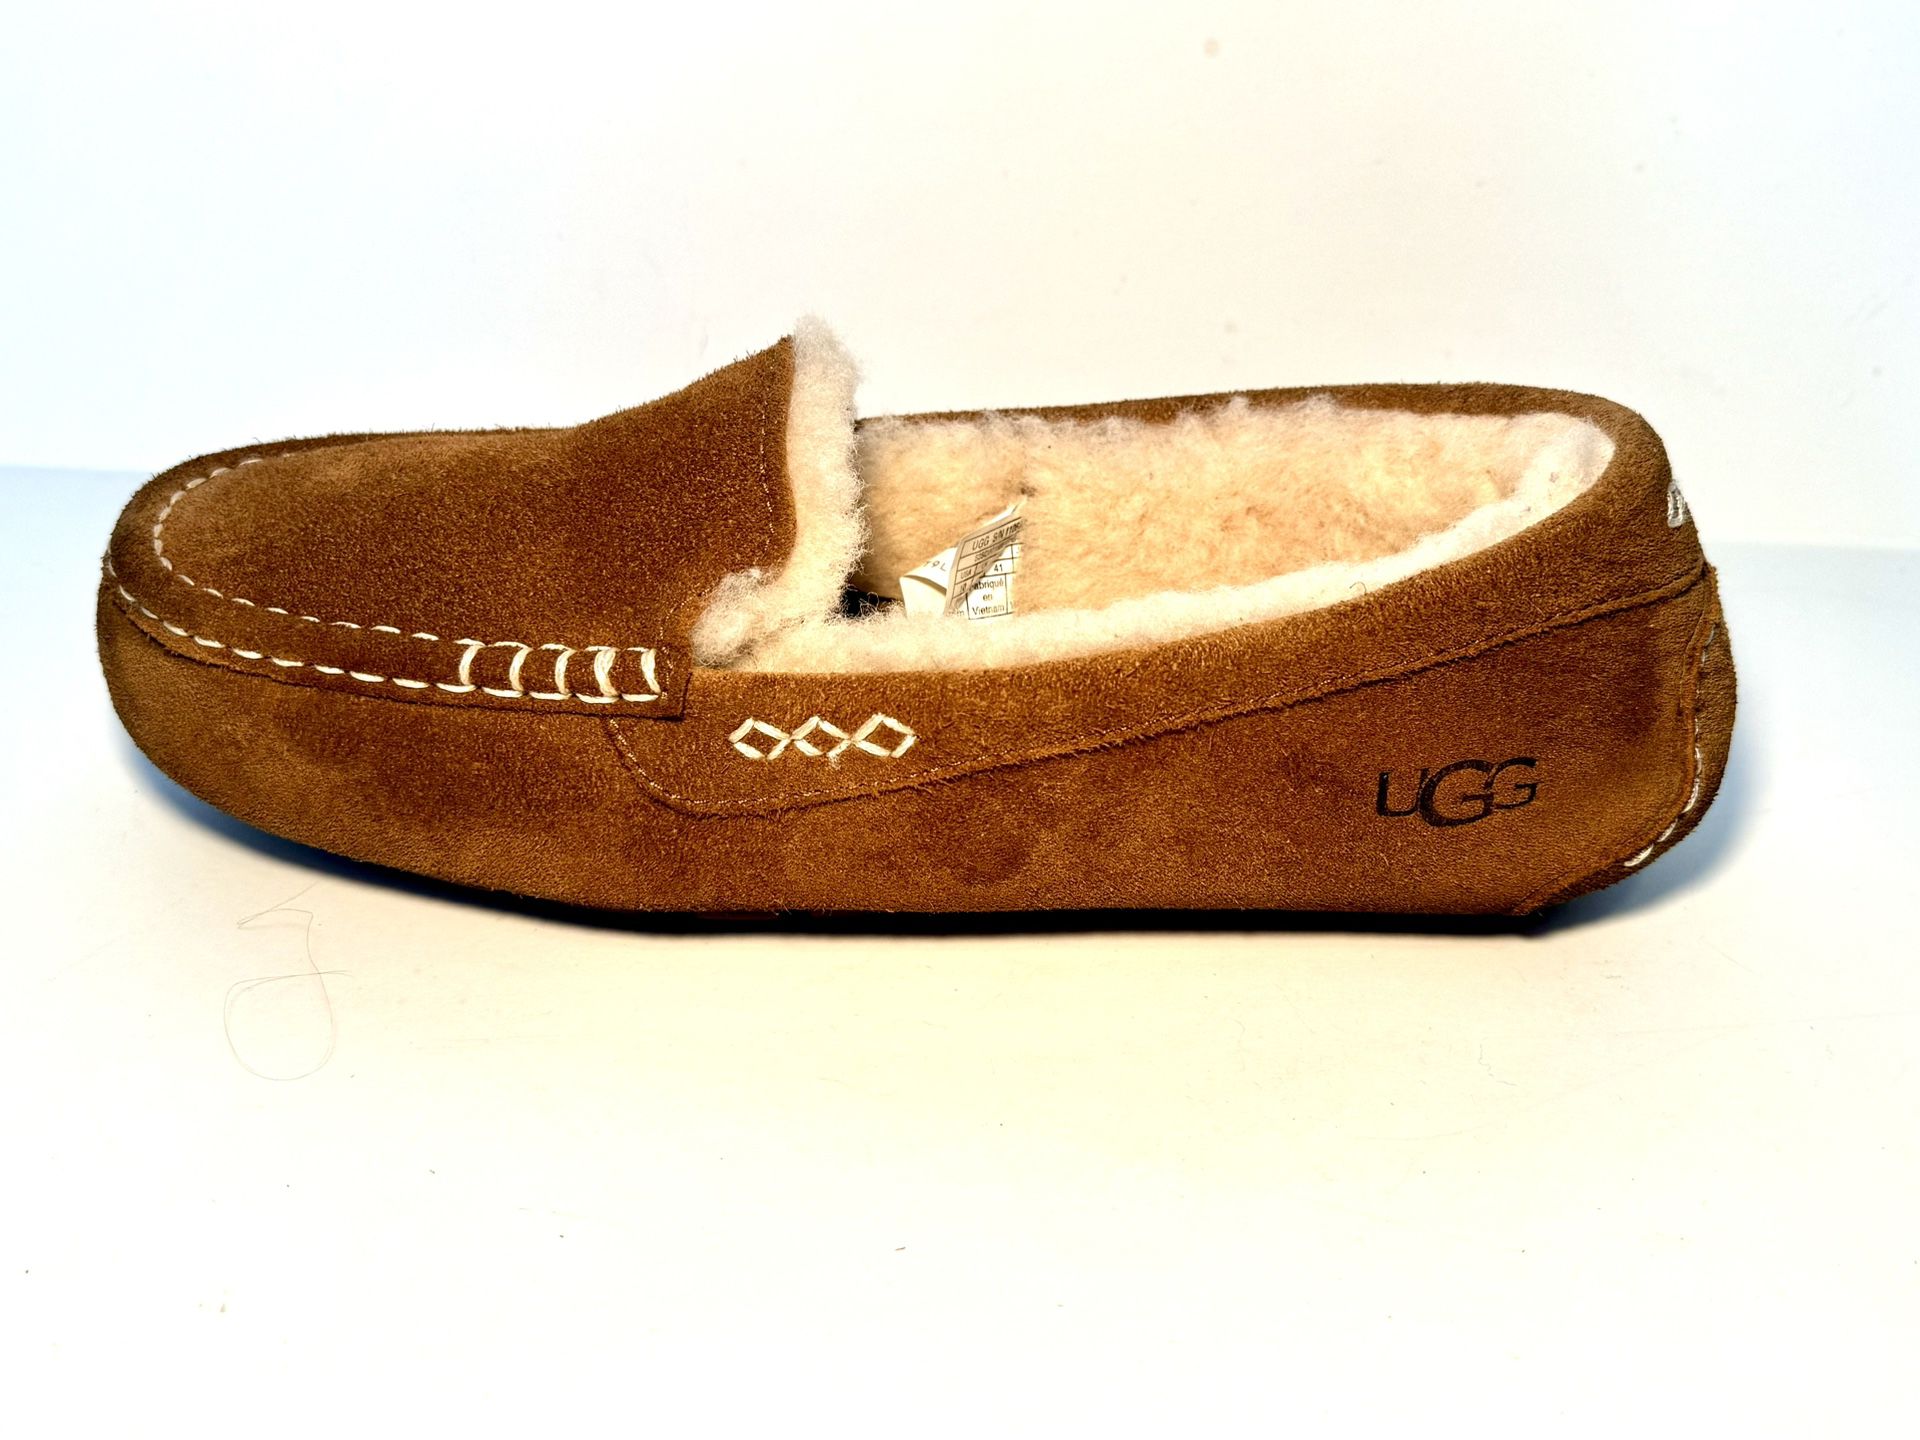 Ugg Womens Ansley Moccasin Slippers Tan Chestnut Suede Sheepskin Size 10 Lined